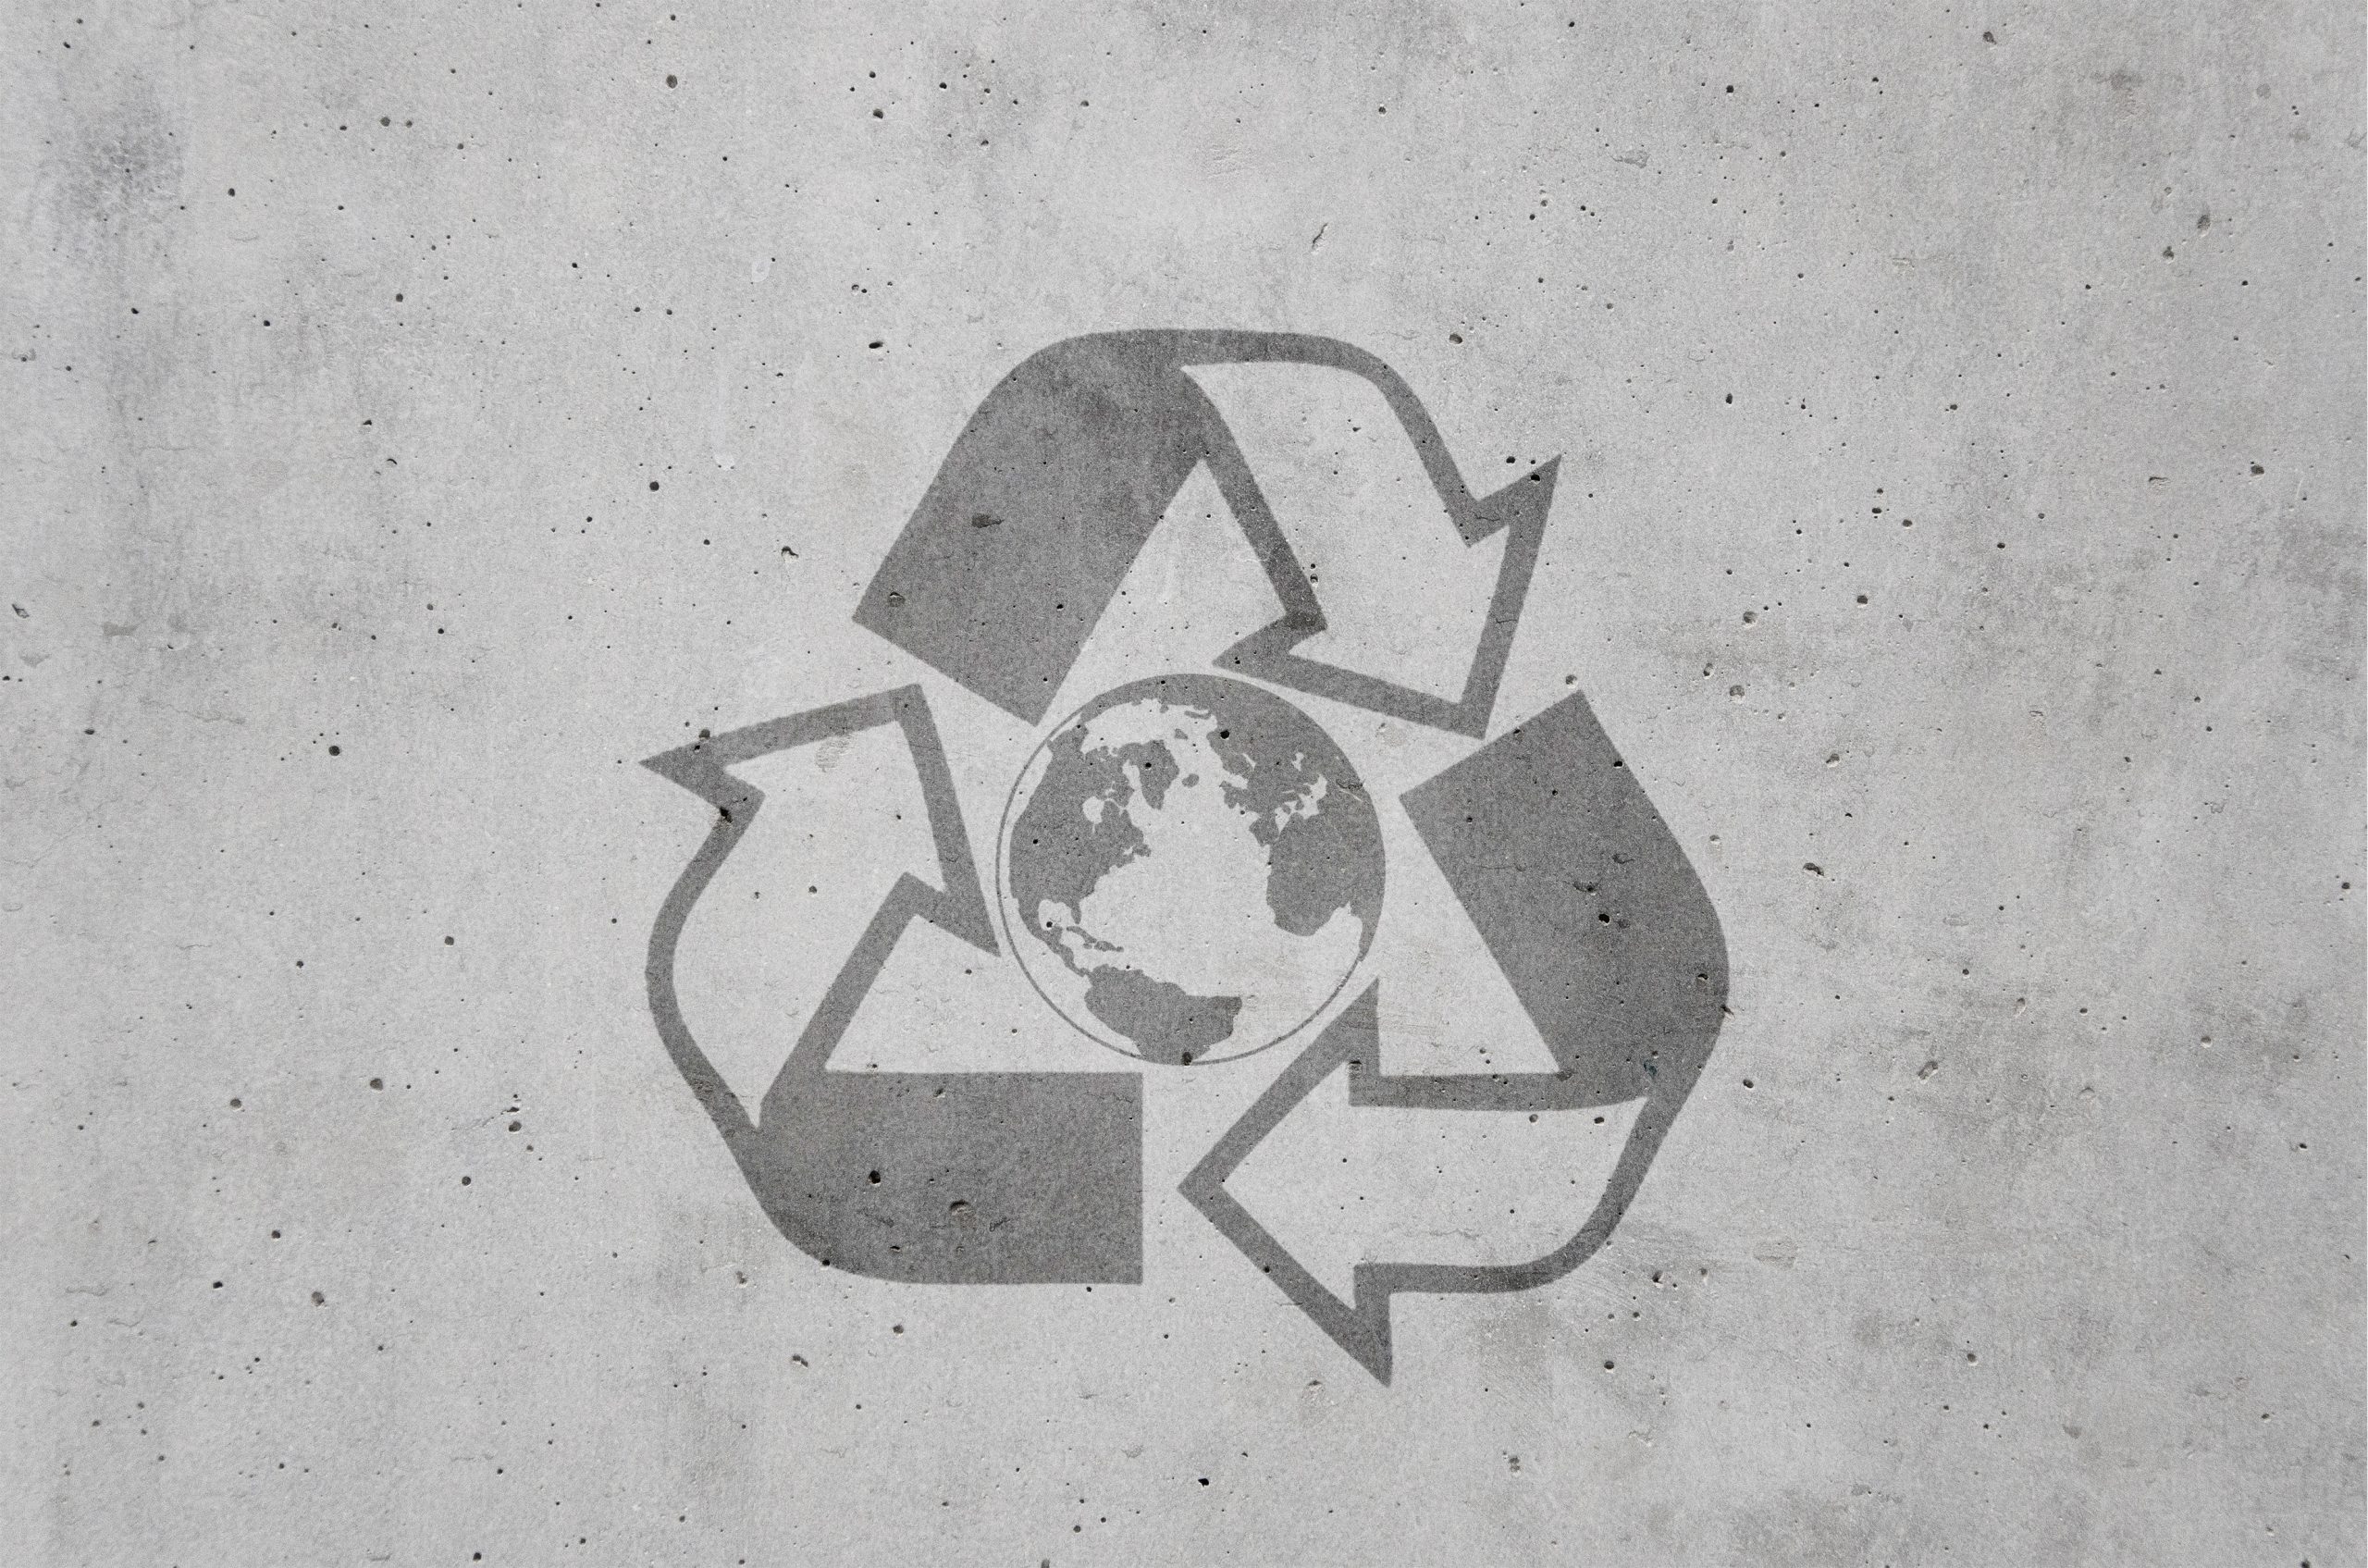 Dark,Shadow,Of,Recycle,Symbol,Around,The,Earth,Sphere,Map